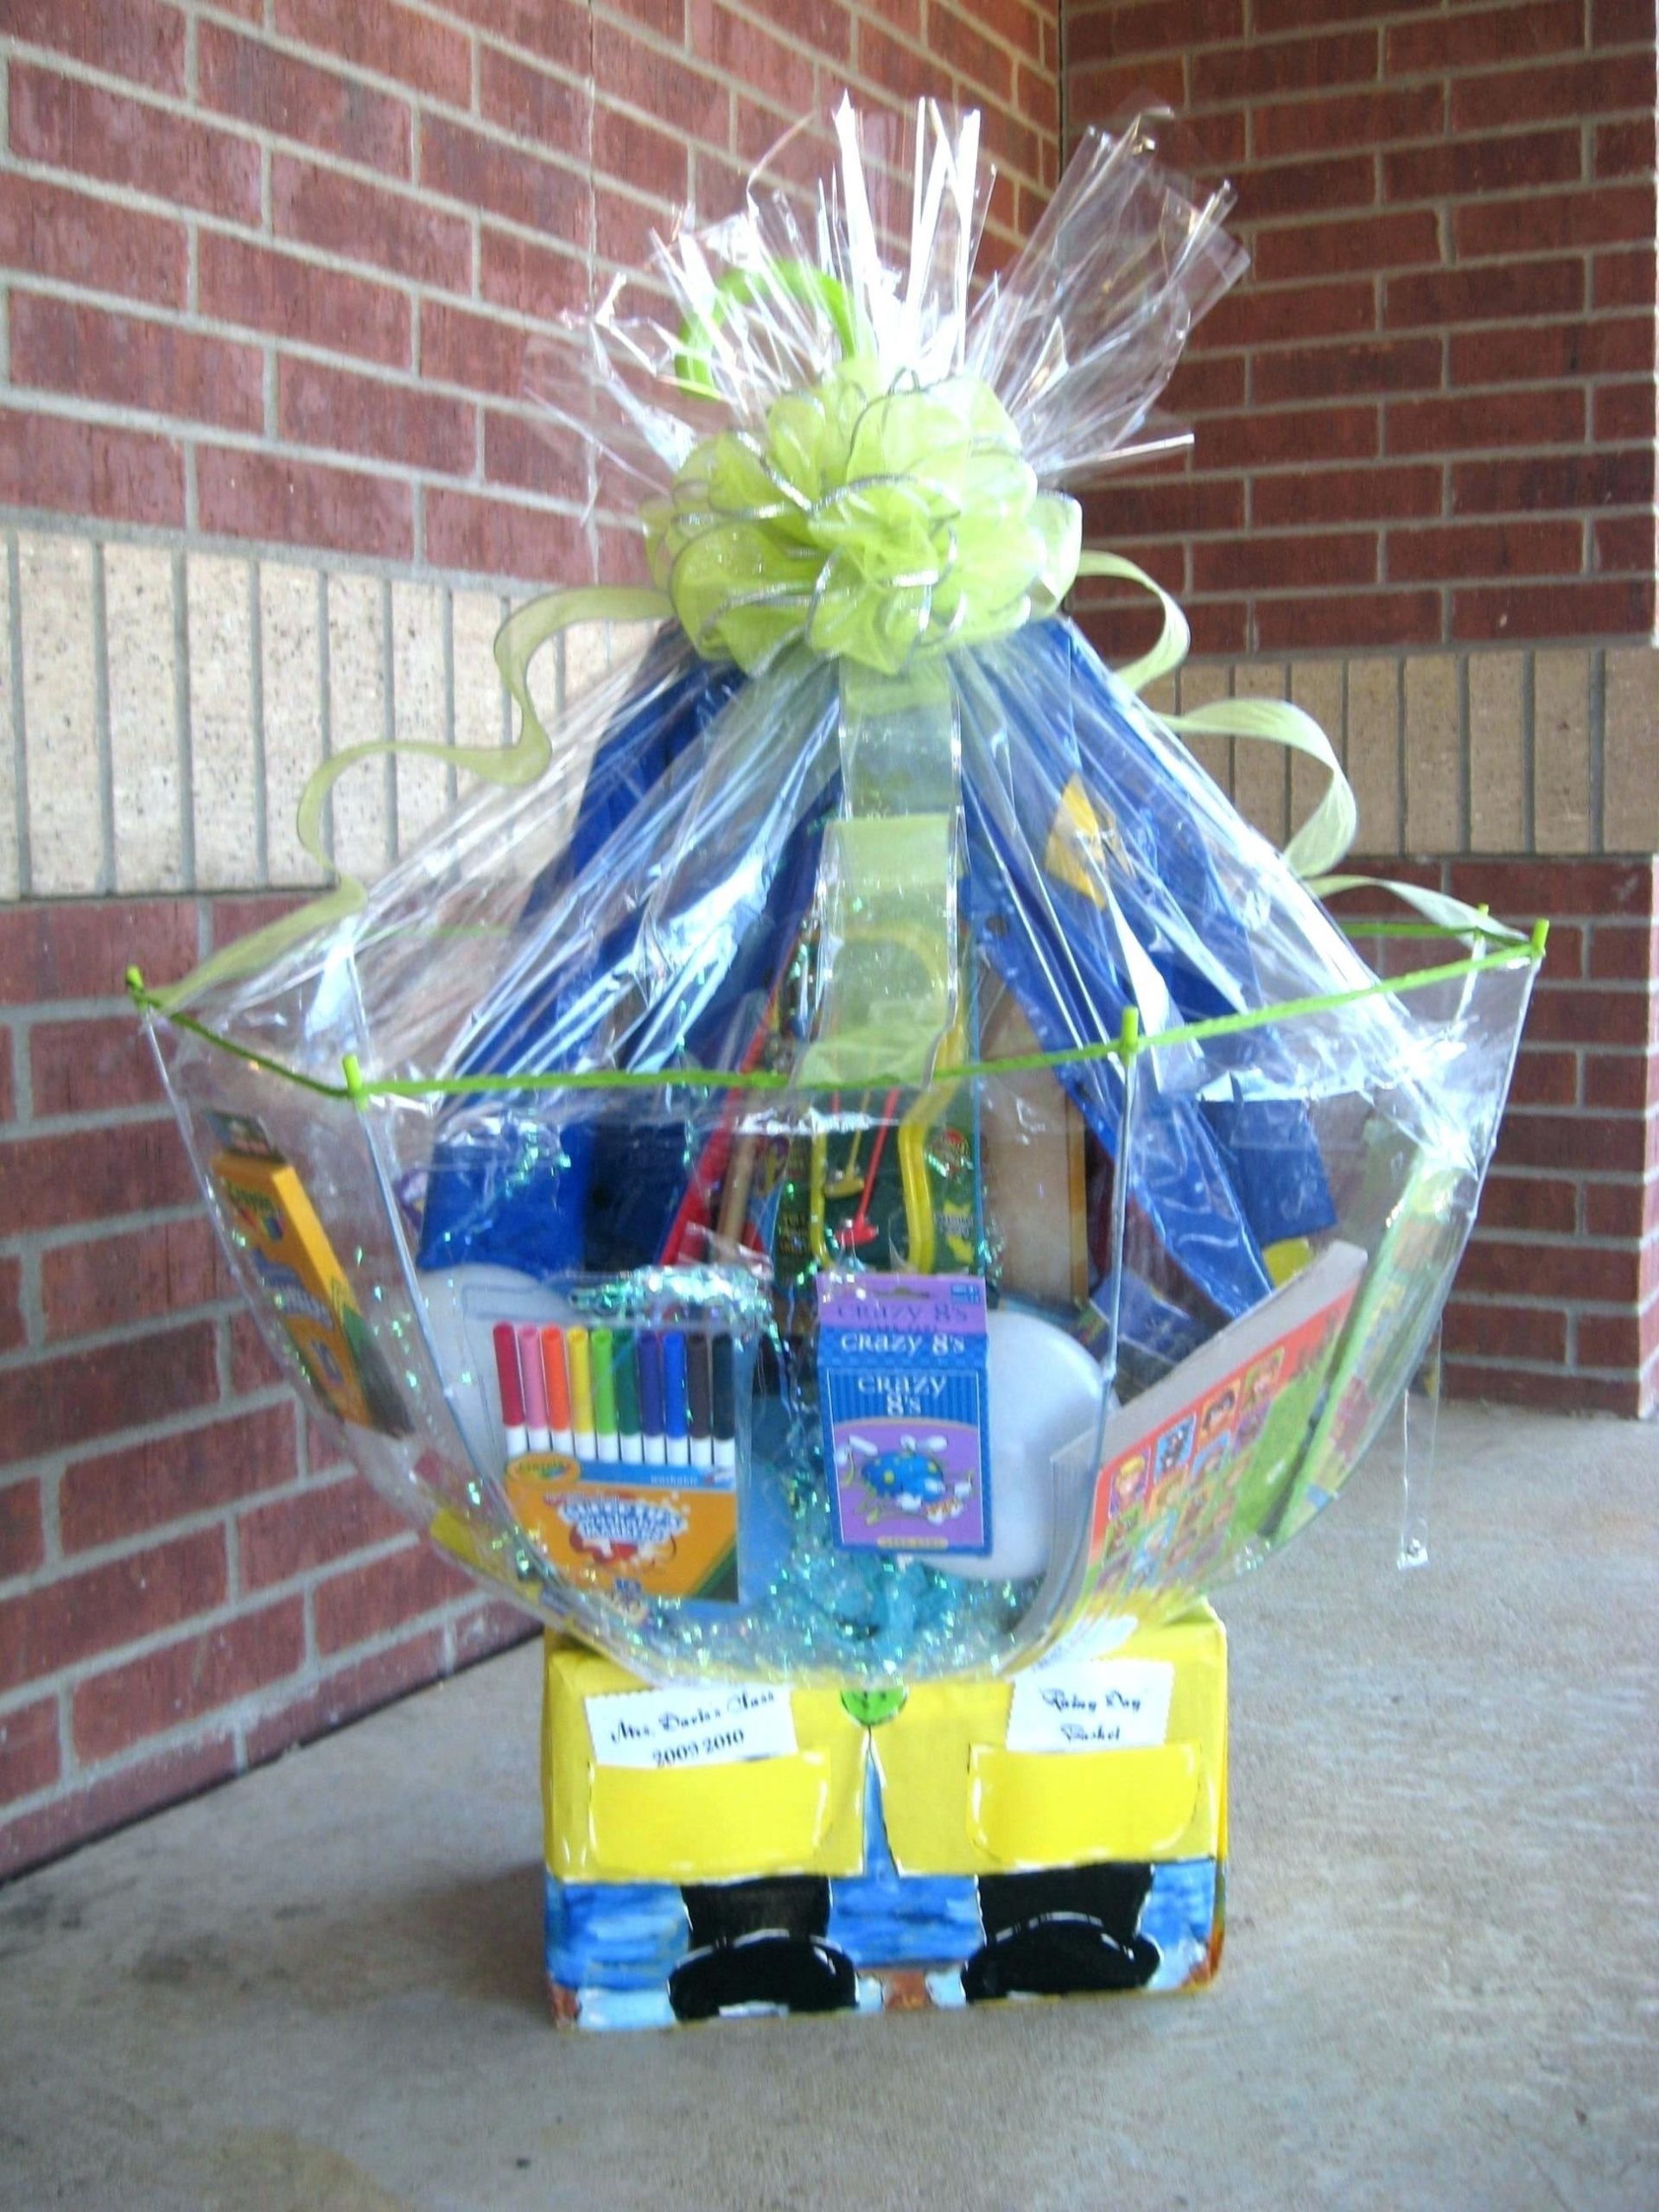 Gift Basket Ideas For Auctions
 10 Cute Silent Auction Gift Basket Ideas 2019